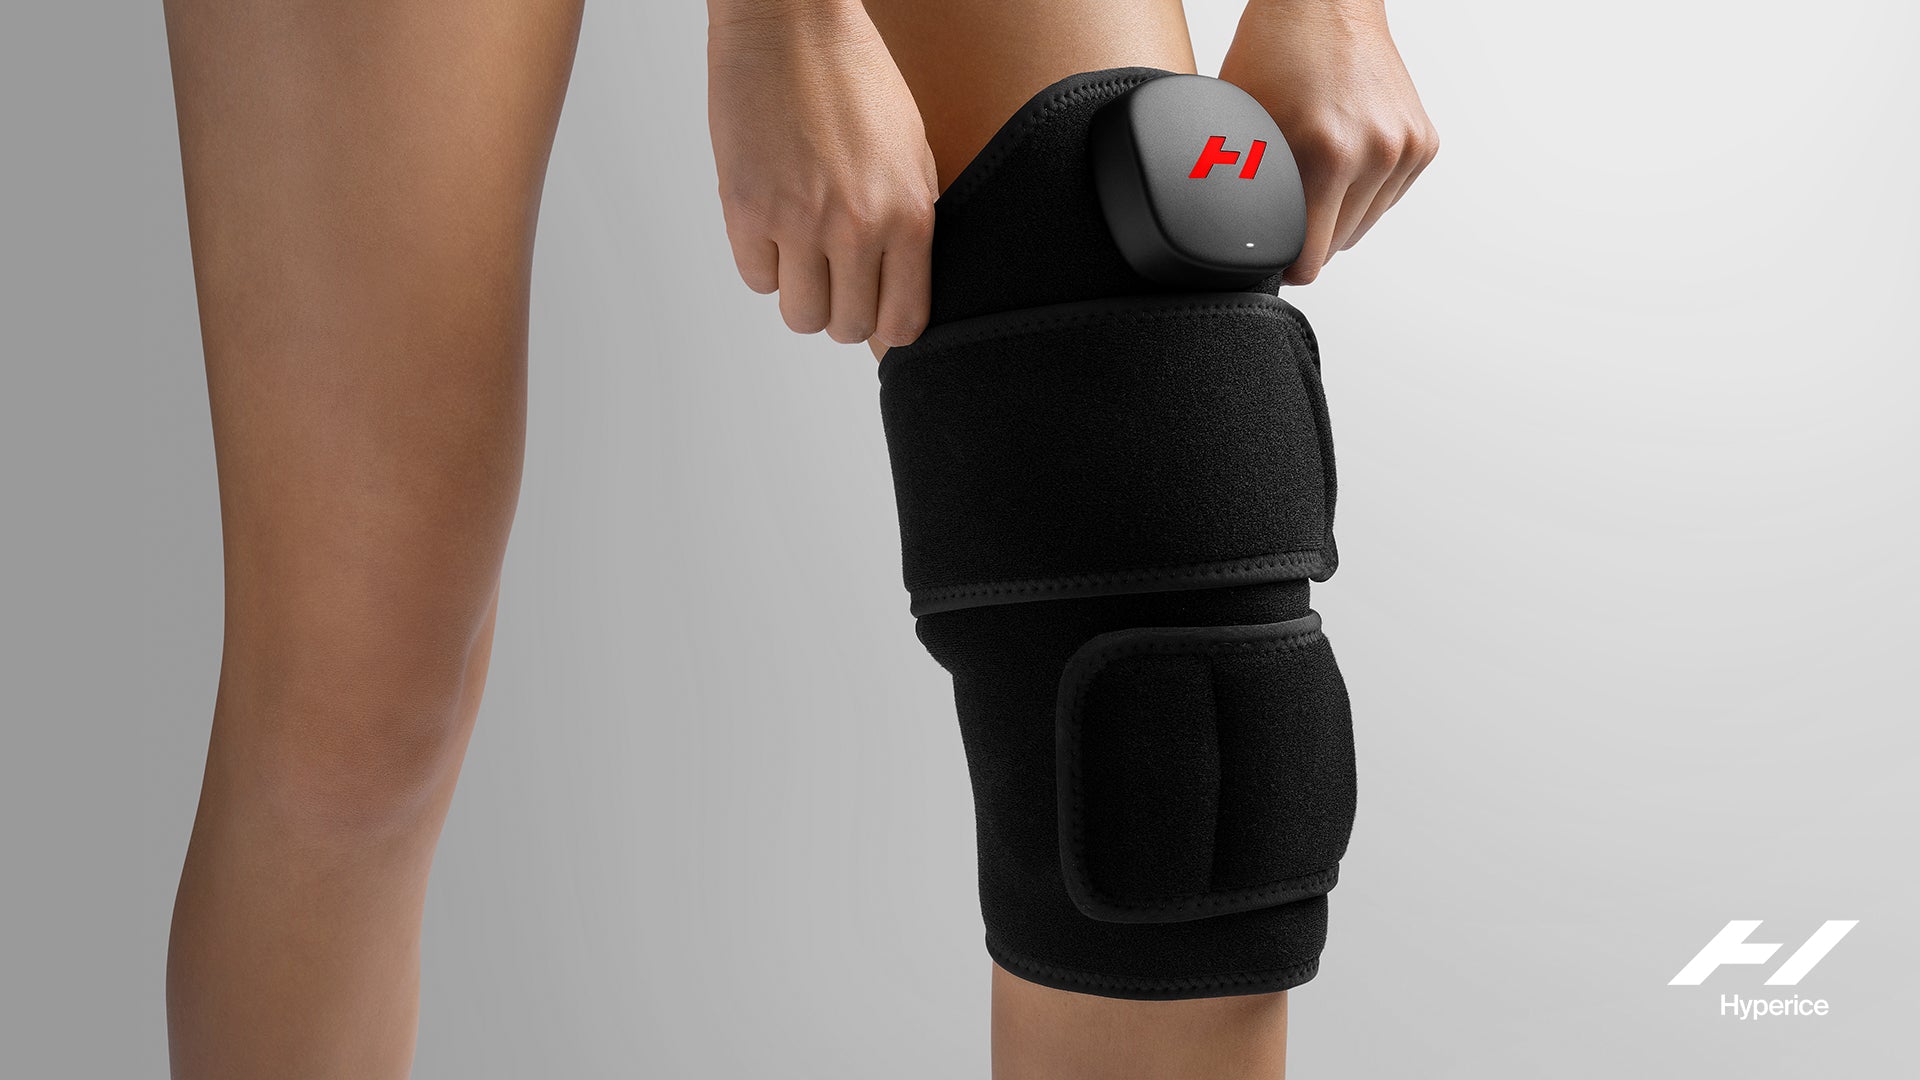 Reducing Pain with Heat & Vibration Therapy